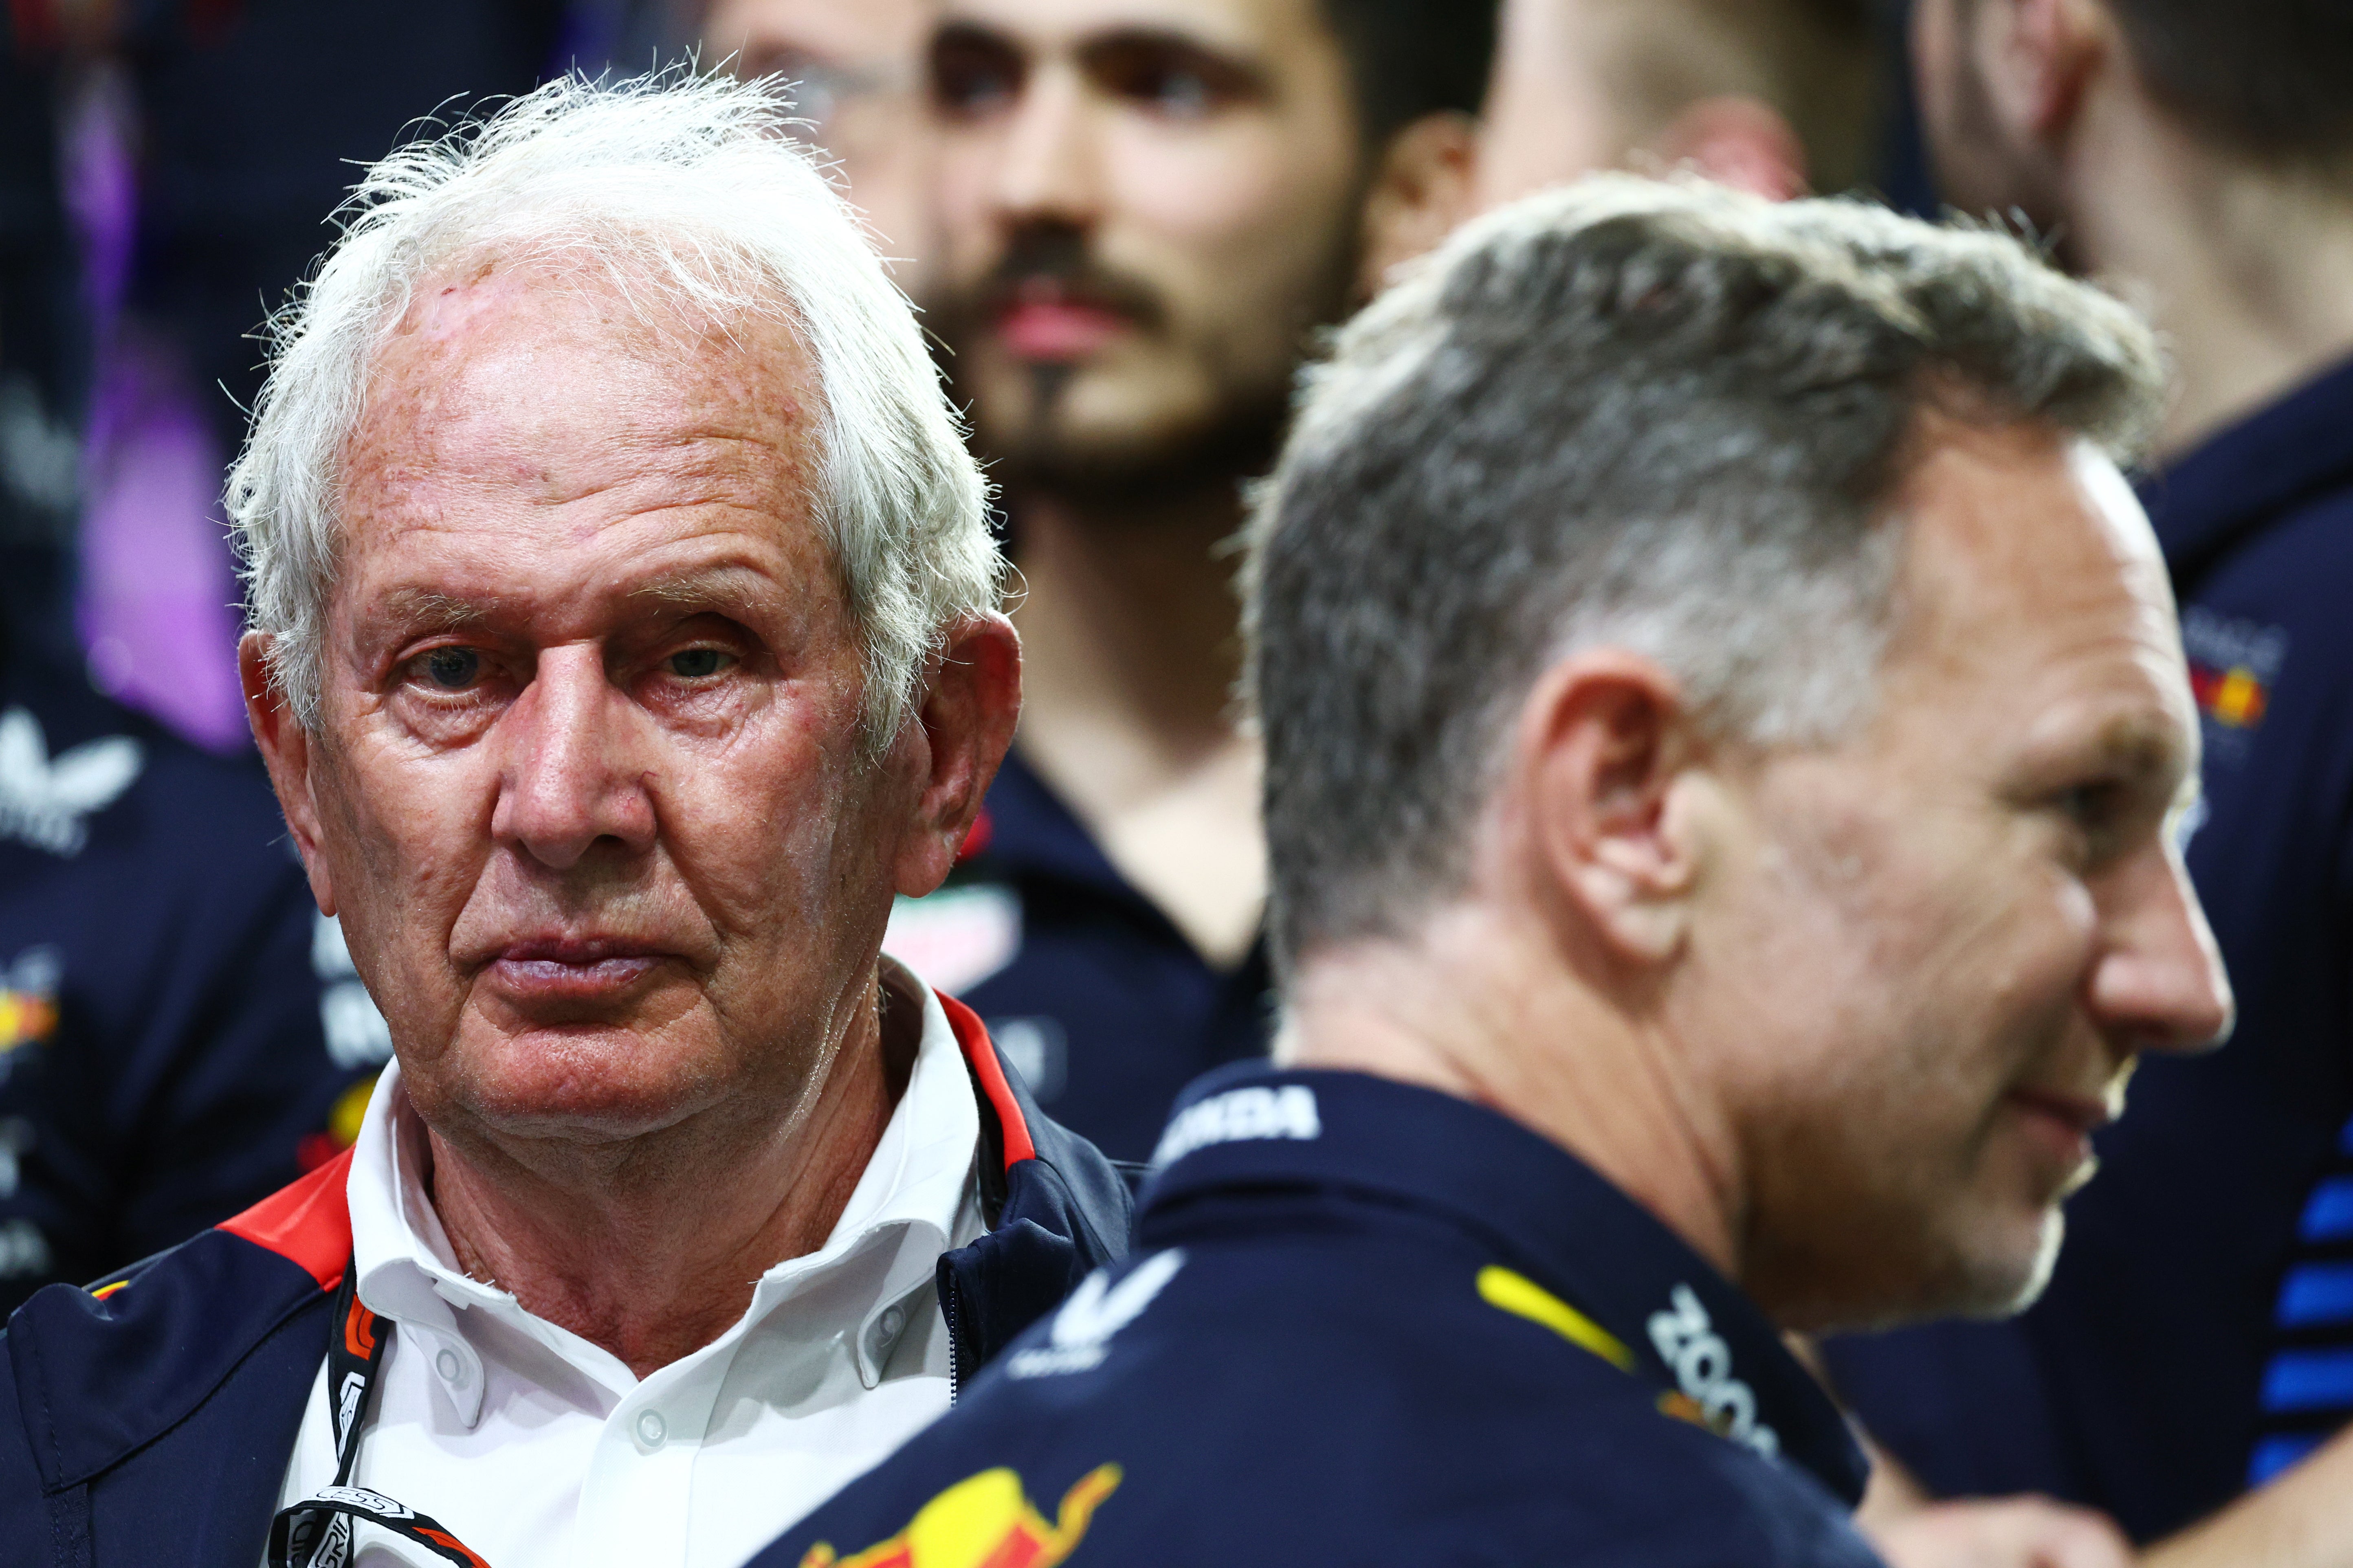 Newey is said to be unhappy with the current power struggle involving Helmut Marko (left) and Christian Horner (right)